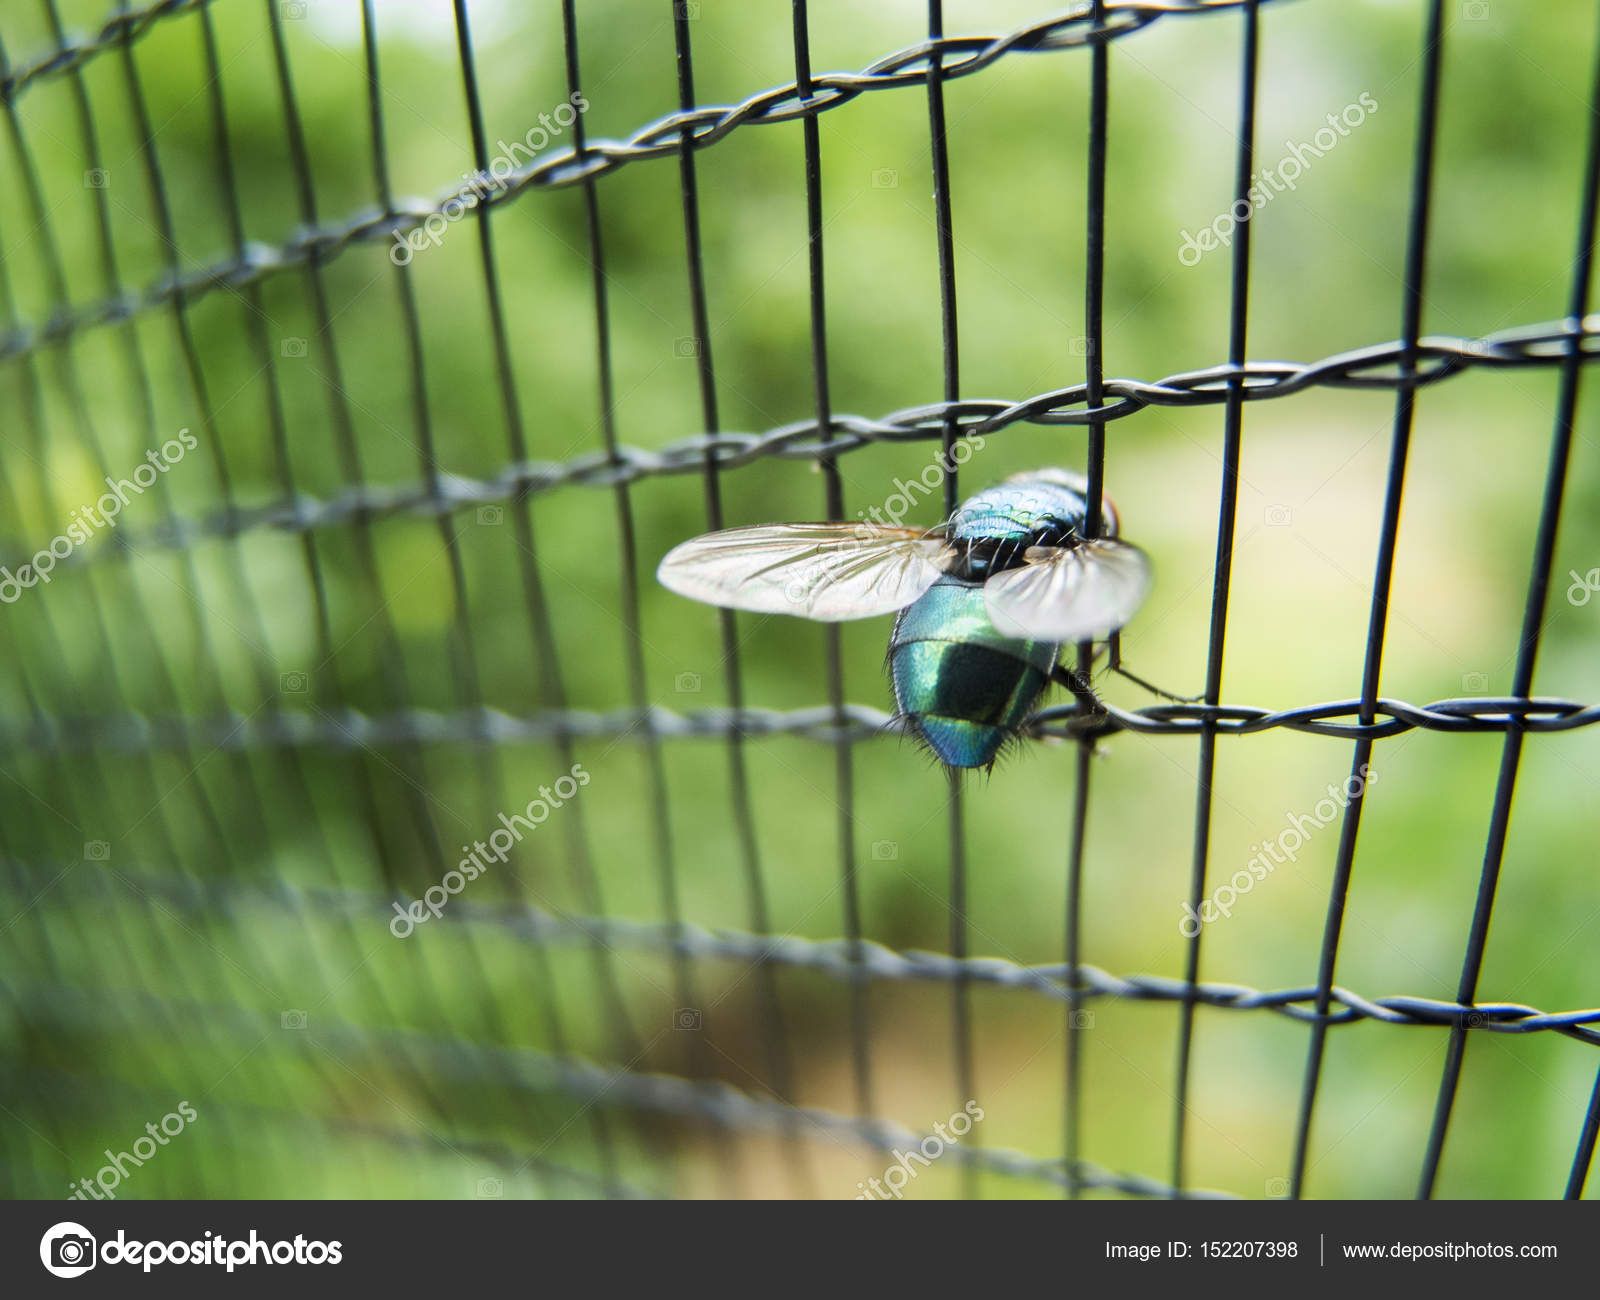 Fly in the fence — Stock Photo © Fotandy #152207398